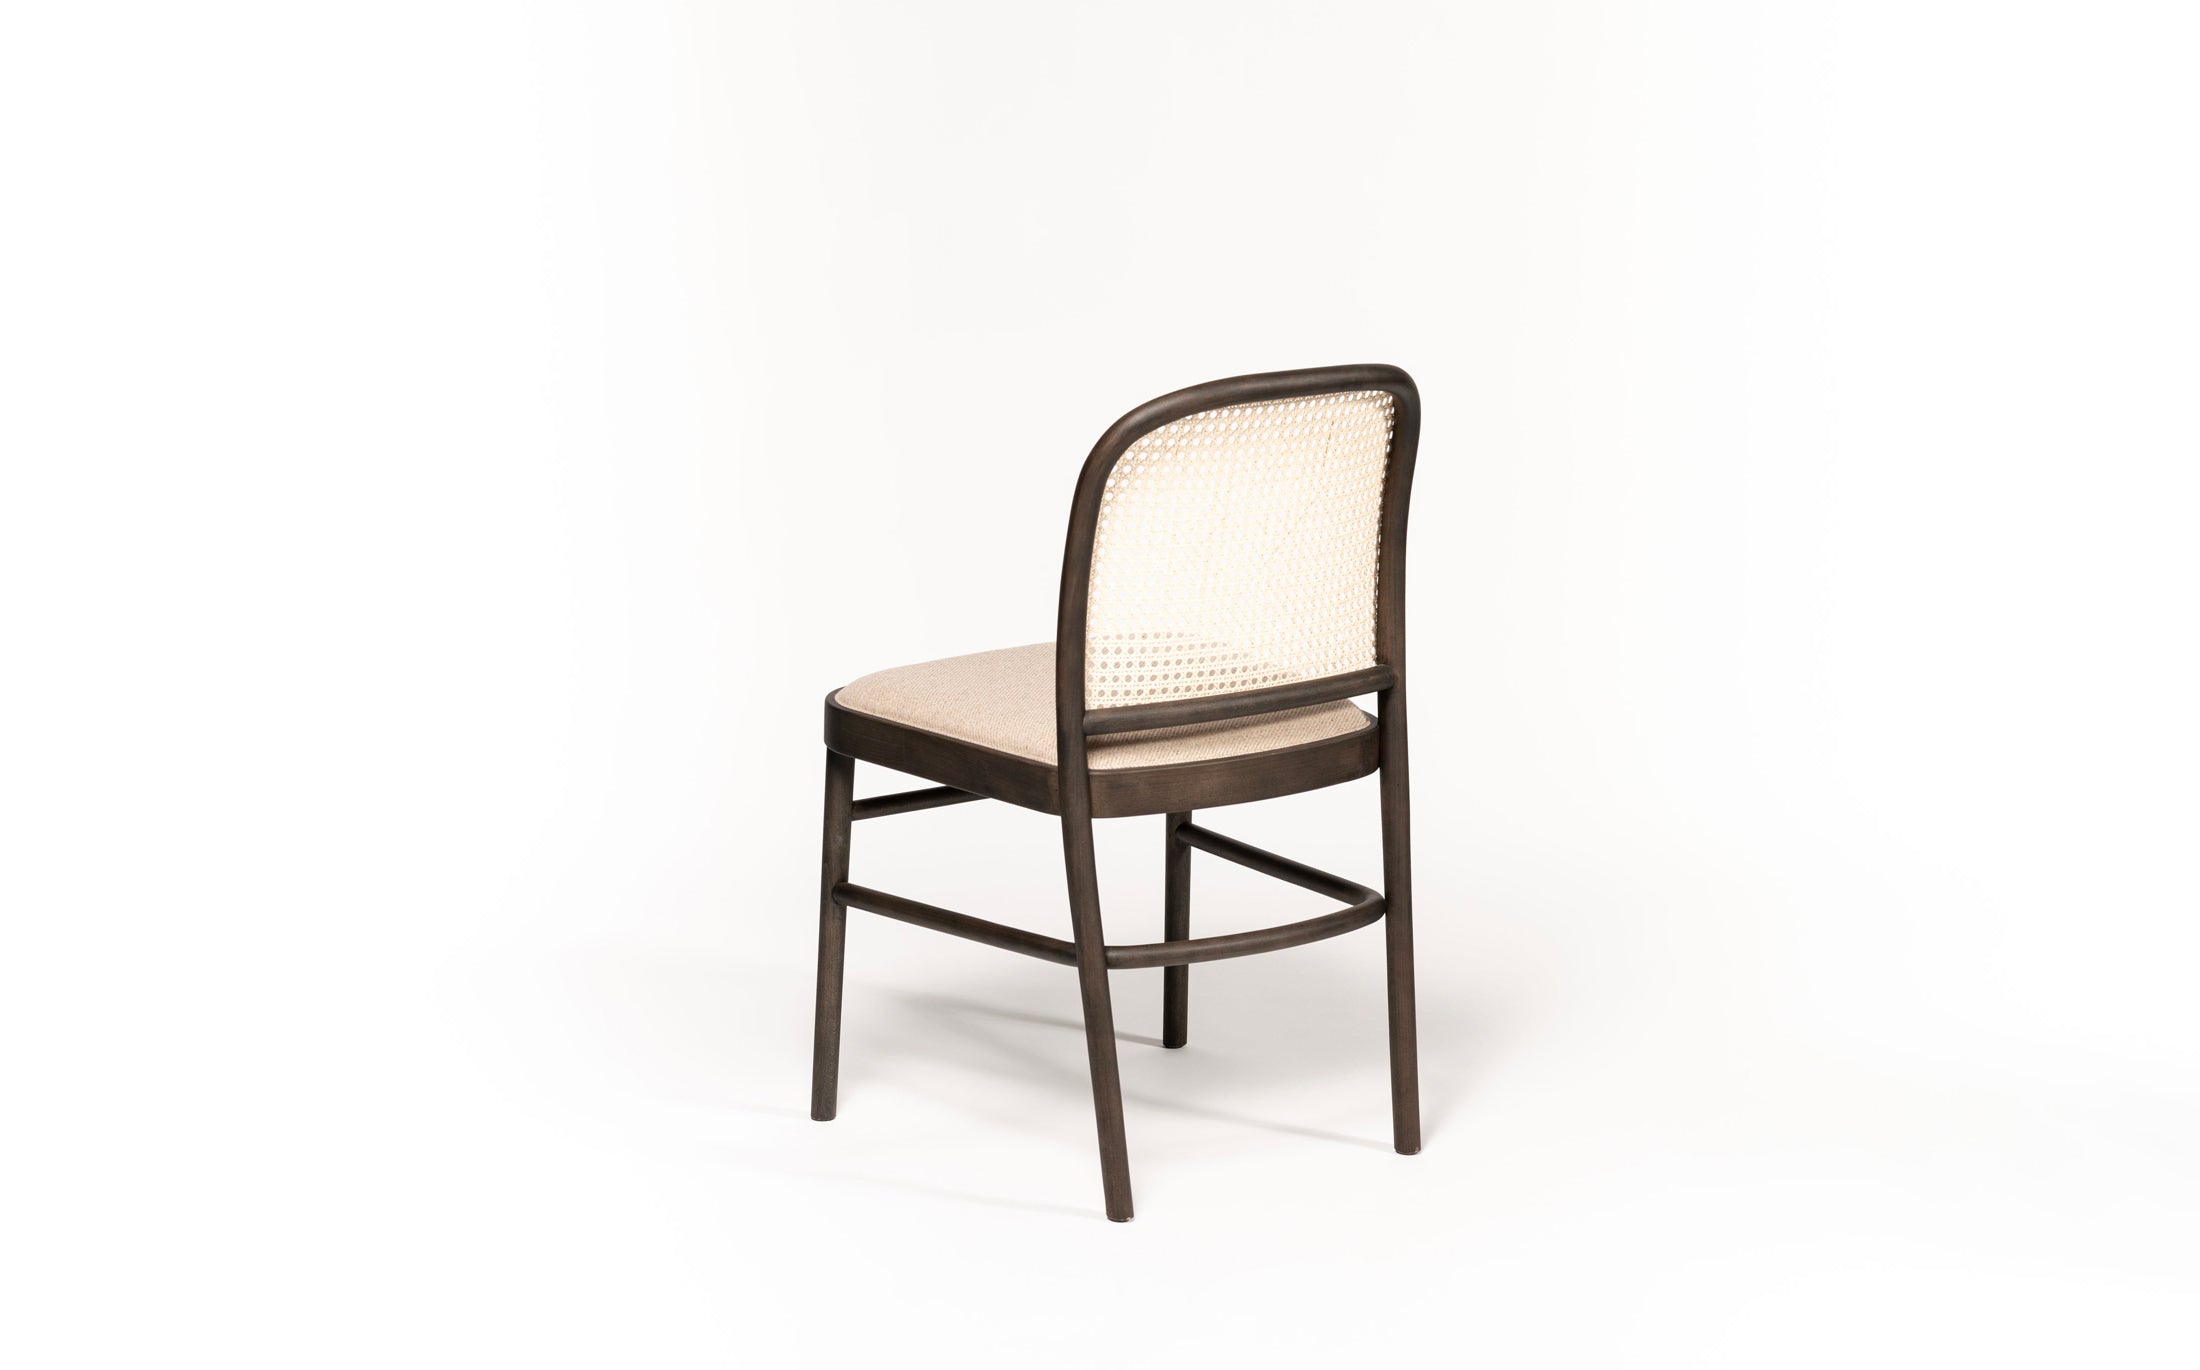 The bent chair - Charcoal Grey - S15310037-63b